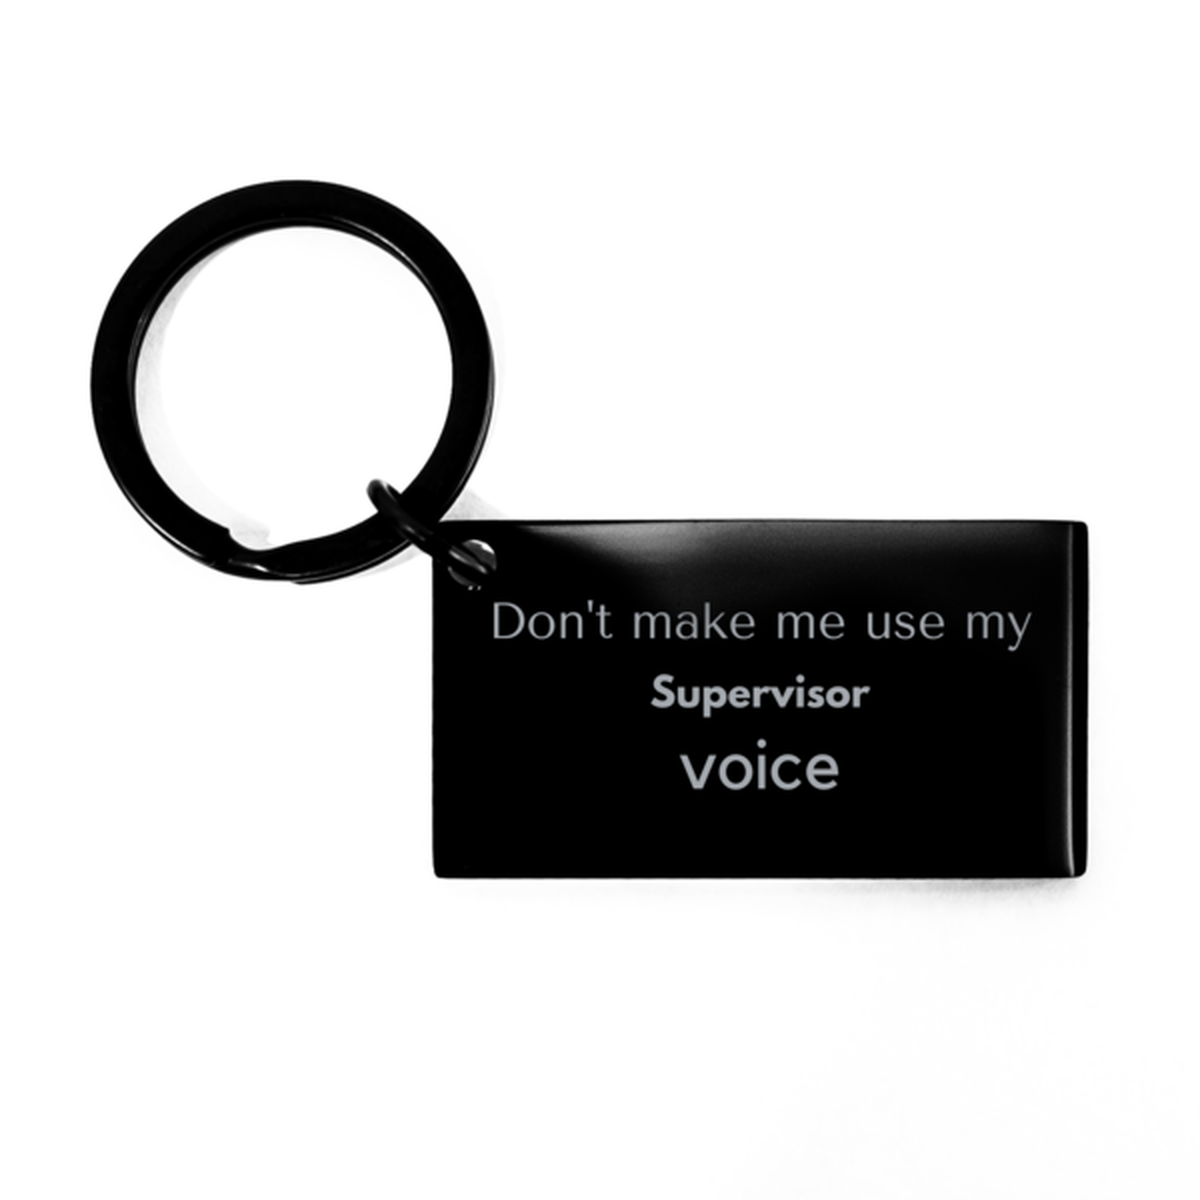 Don't make me use my Supervisor voice, Sarcasm Supervisor Gifts, Christmas Supervisor Keychain Birthday Unique Gifts For Supervisor Coworkers, Men, Women, Colleague, Friends